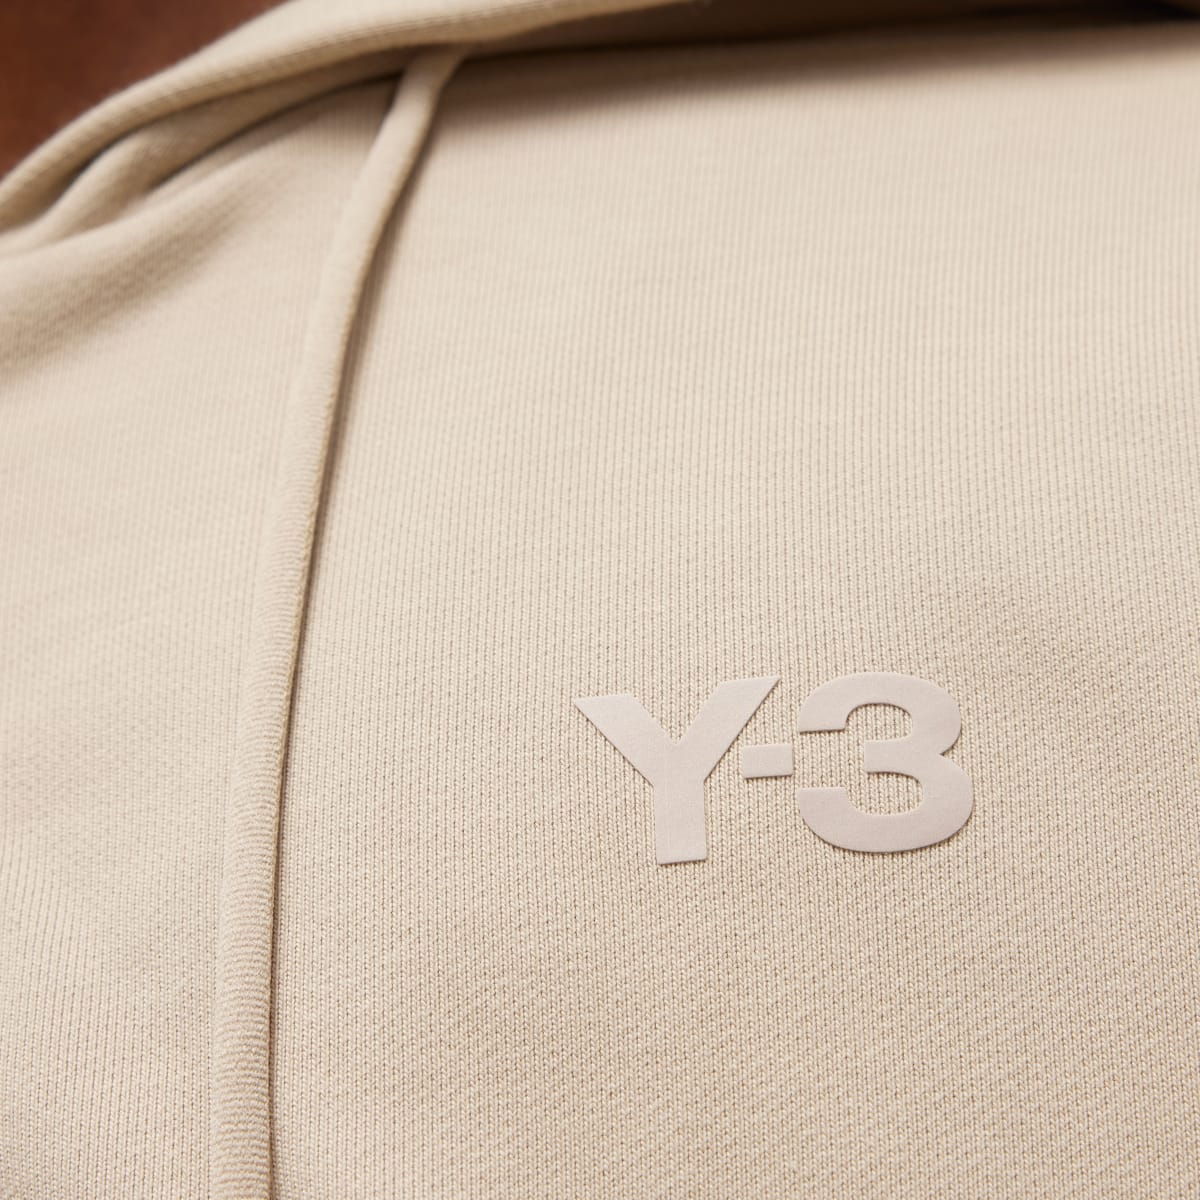 Adidas Y-3 French Terry Zip Hoodie. 7